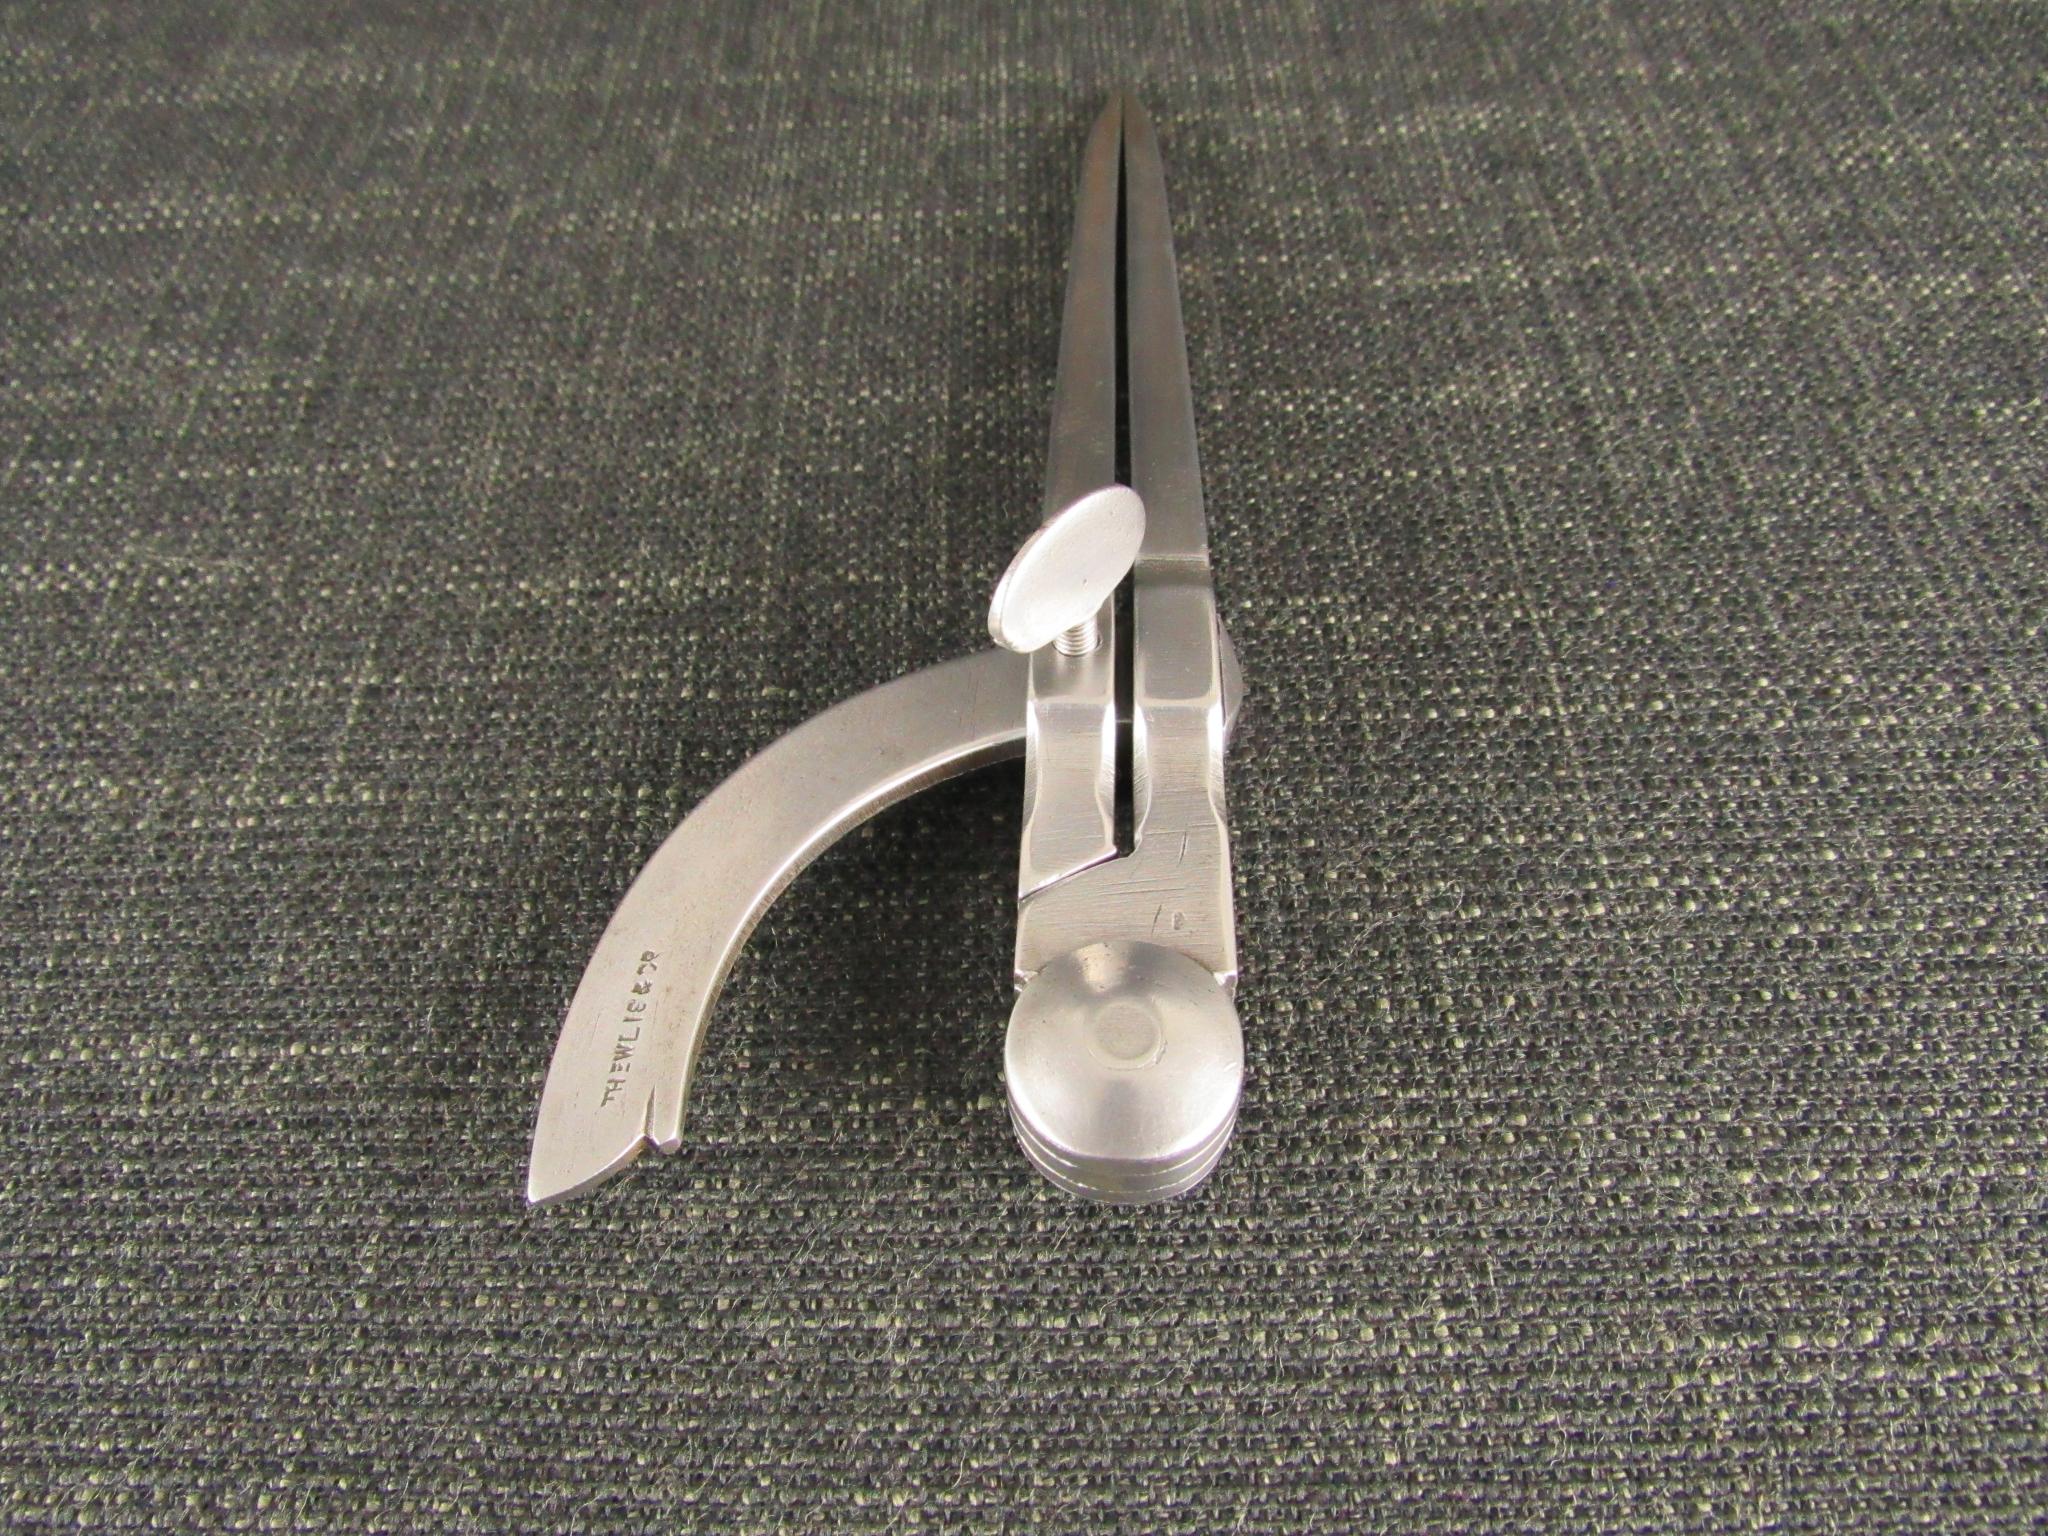 THEWLIS Wing Dividers or Compasses